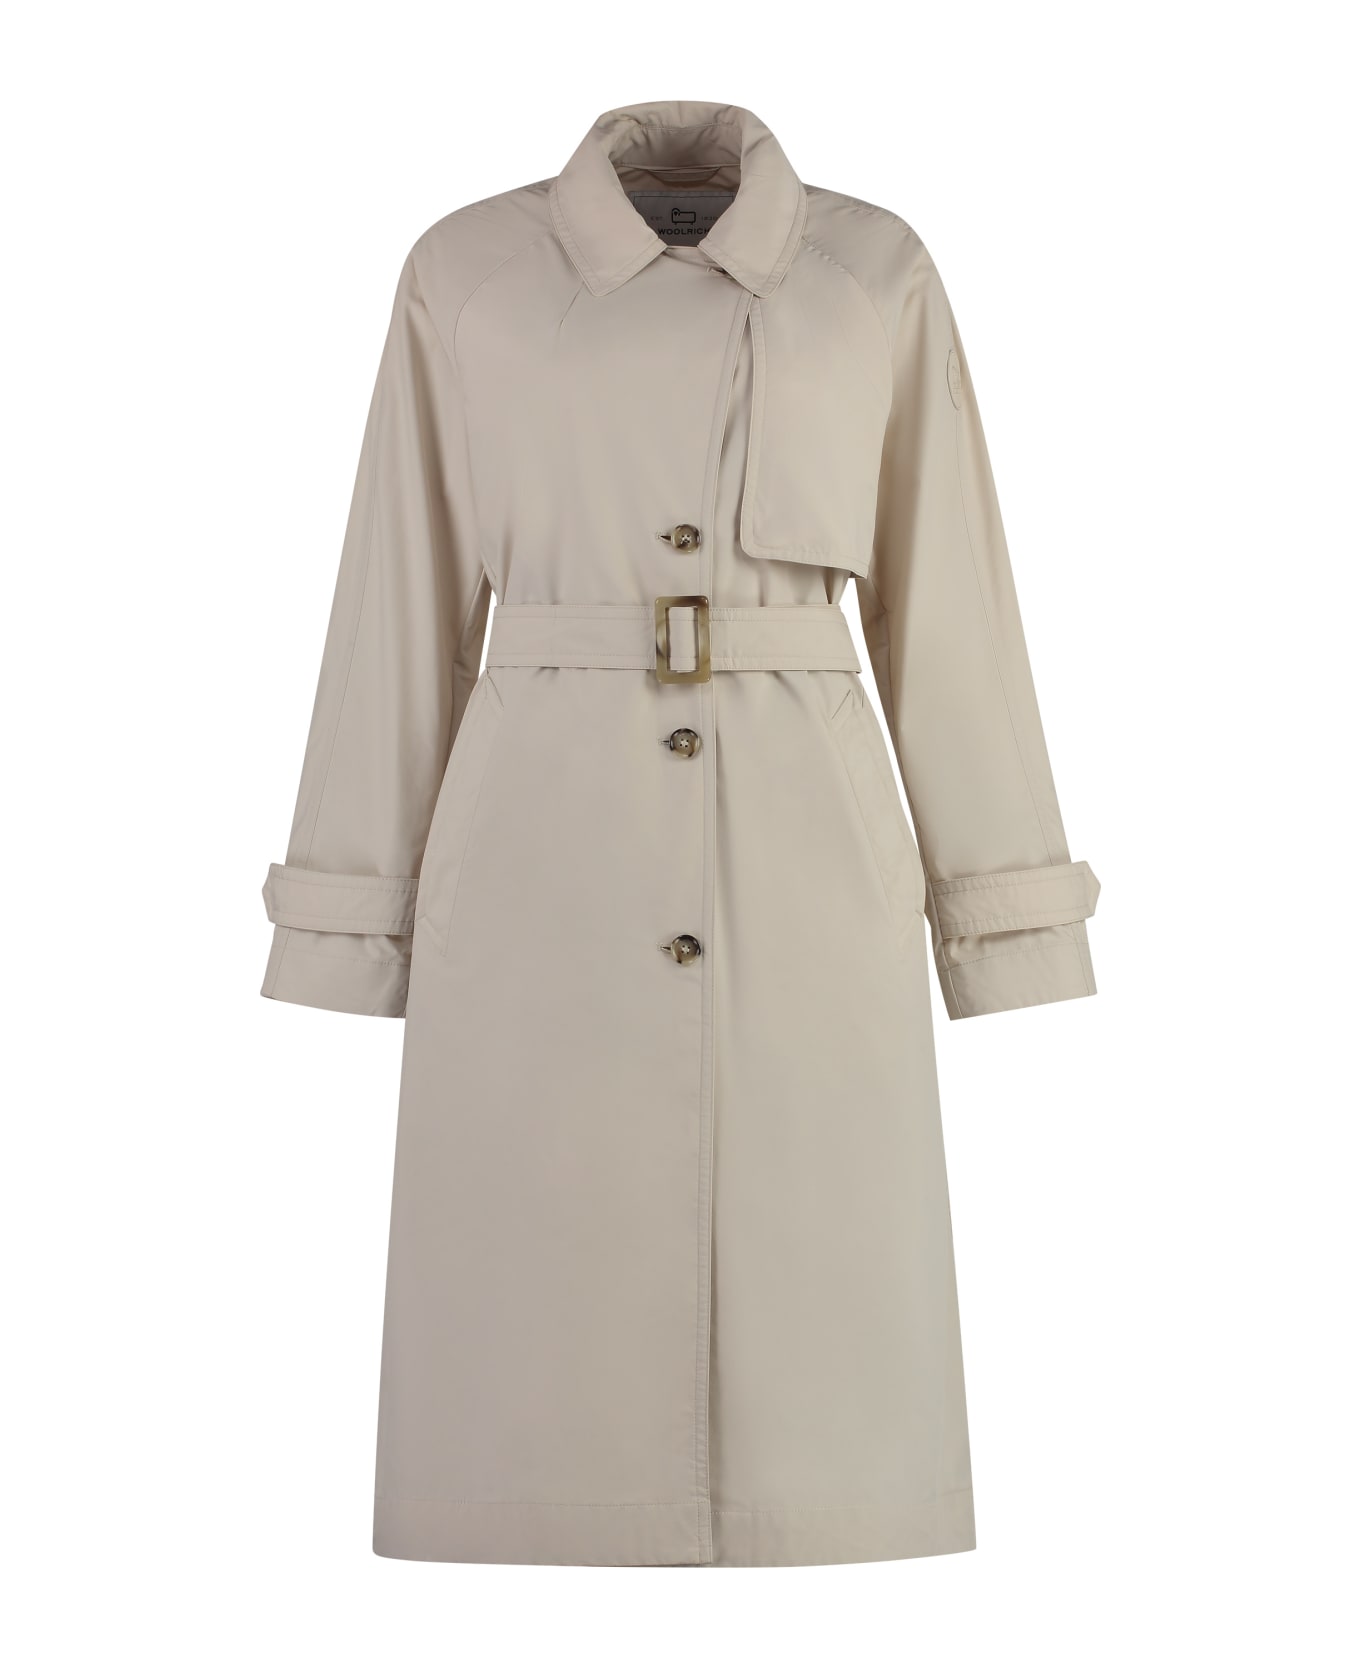 Woolrich Techno Fabric Trench Coat - Beige